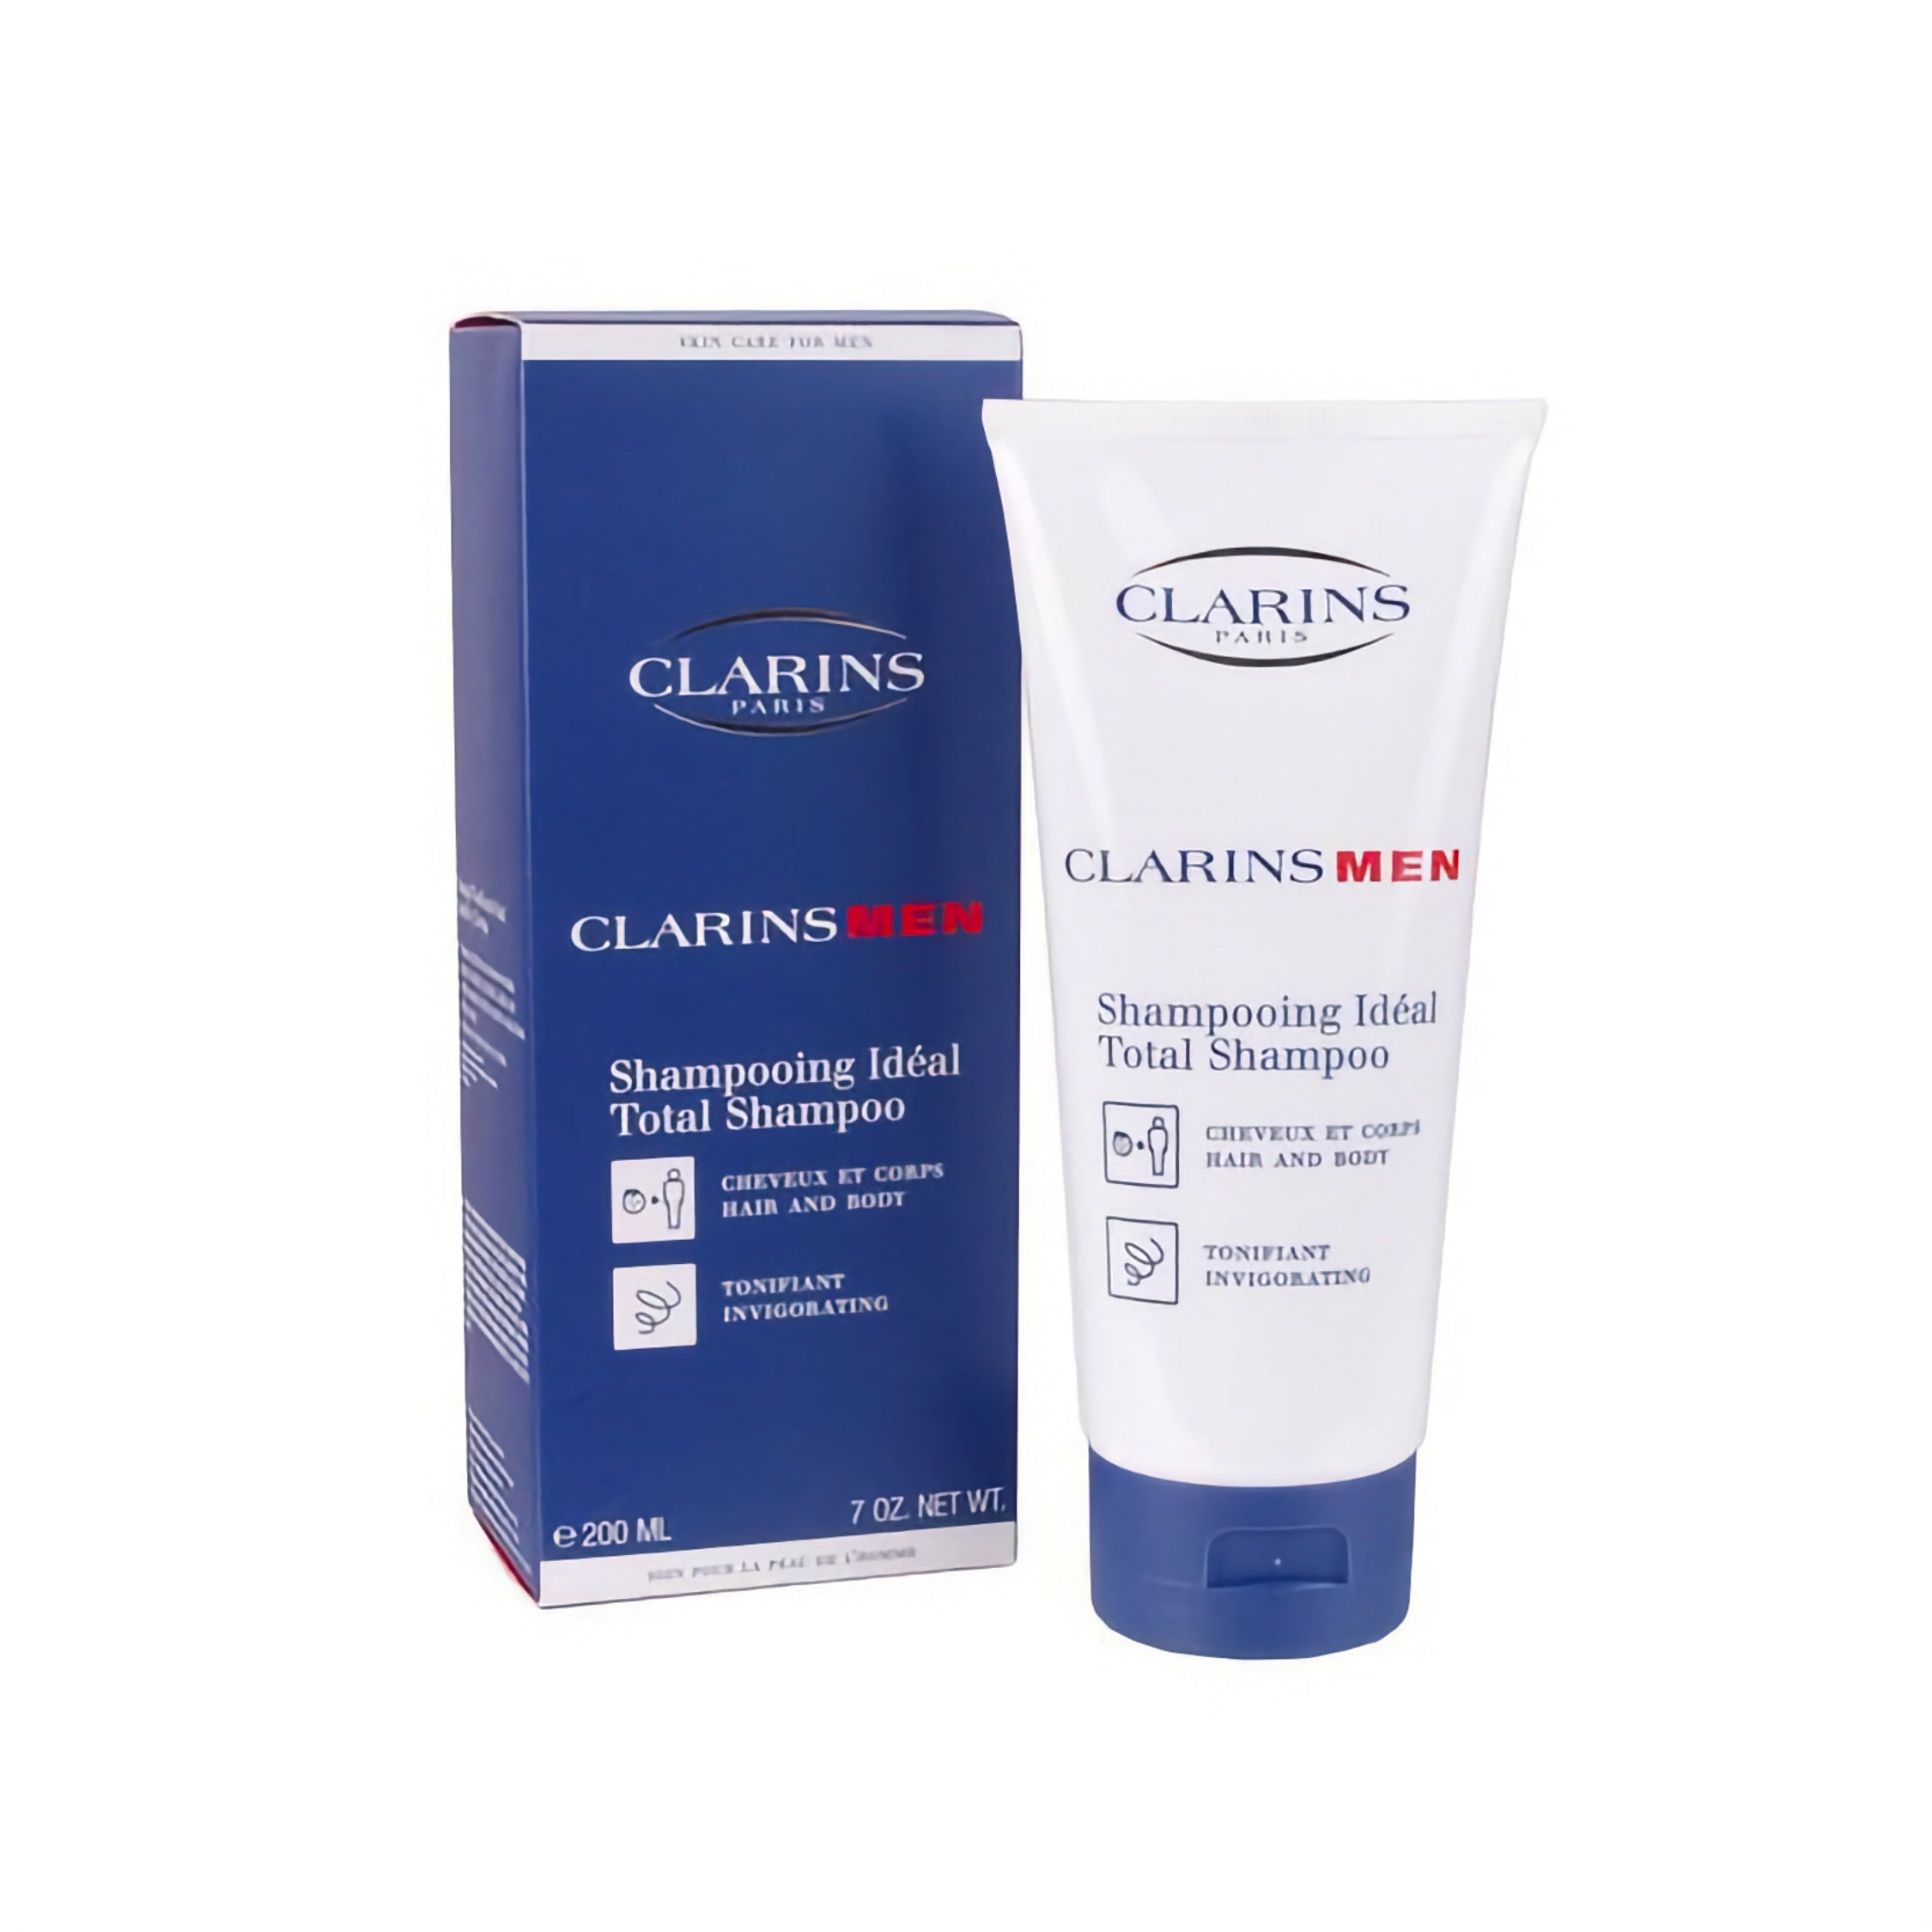 Clarins - Men - Shampooing Idéal - Total Shampoo - Cheveux Et Corps Hair And Body - Tonifiant Invigorating